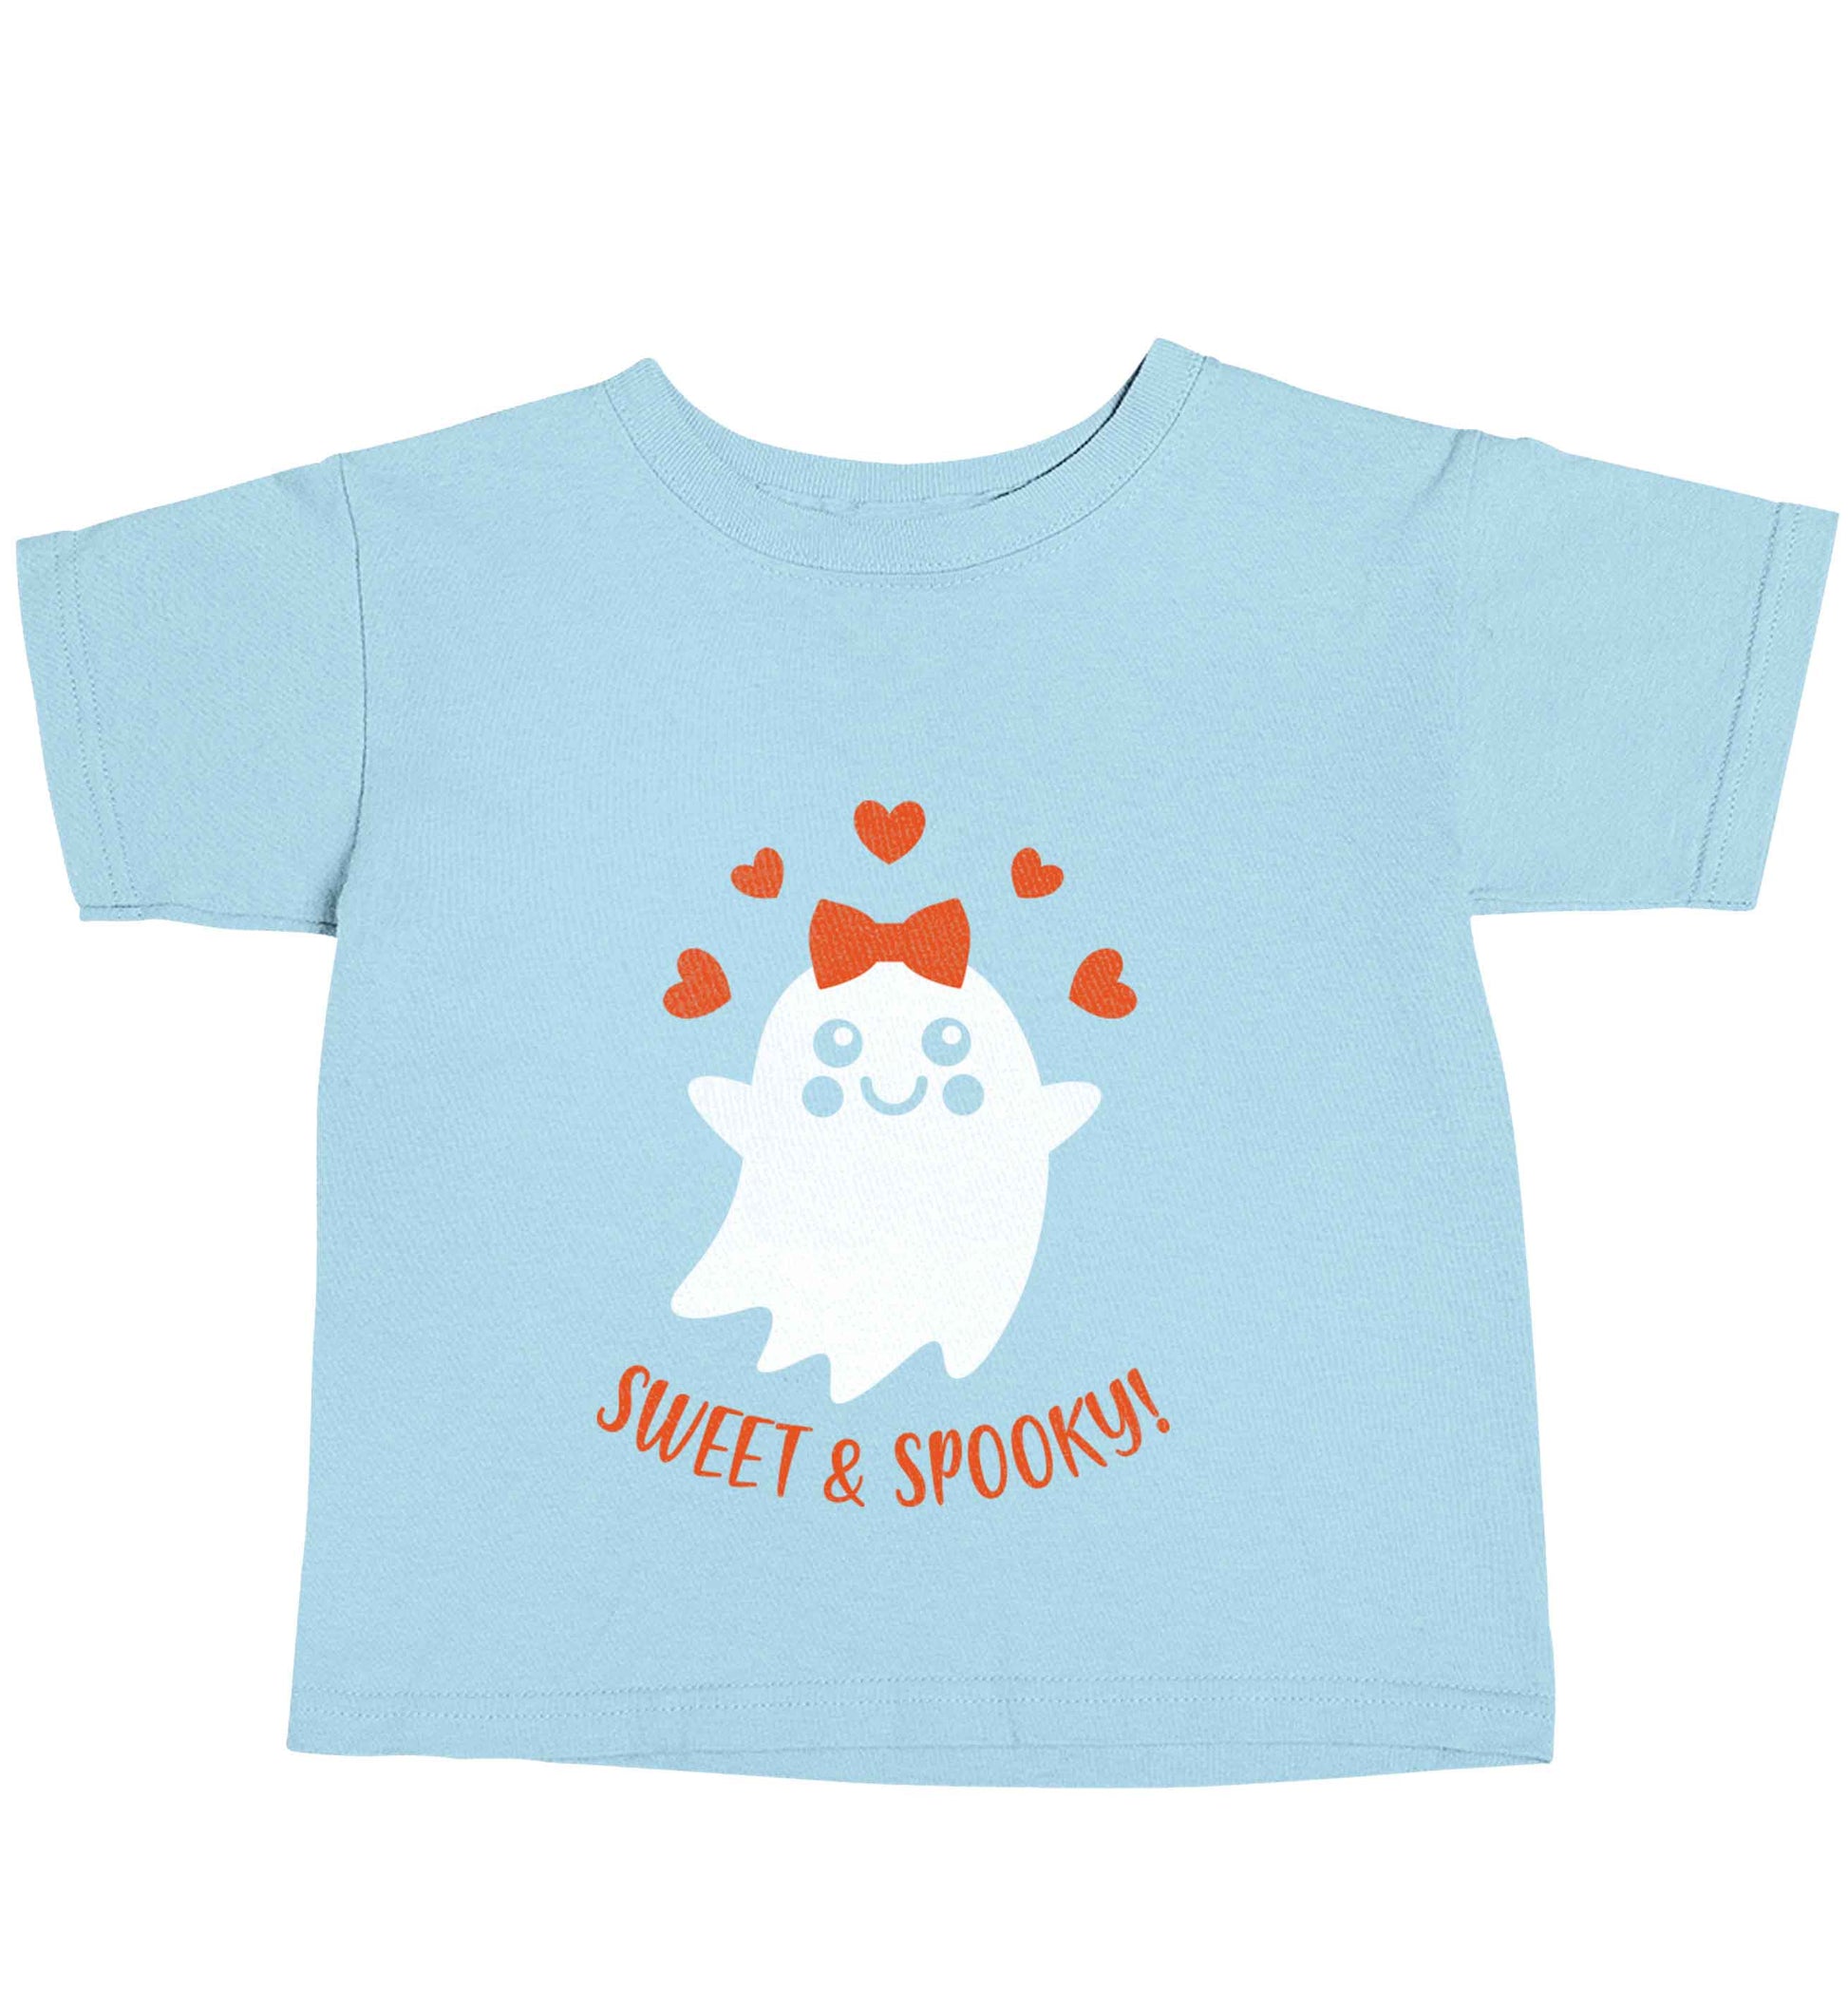 Sweet and spooky light blue baby toddler Tshirt 2 Years